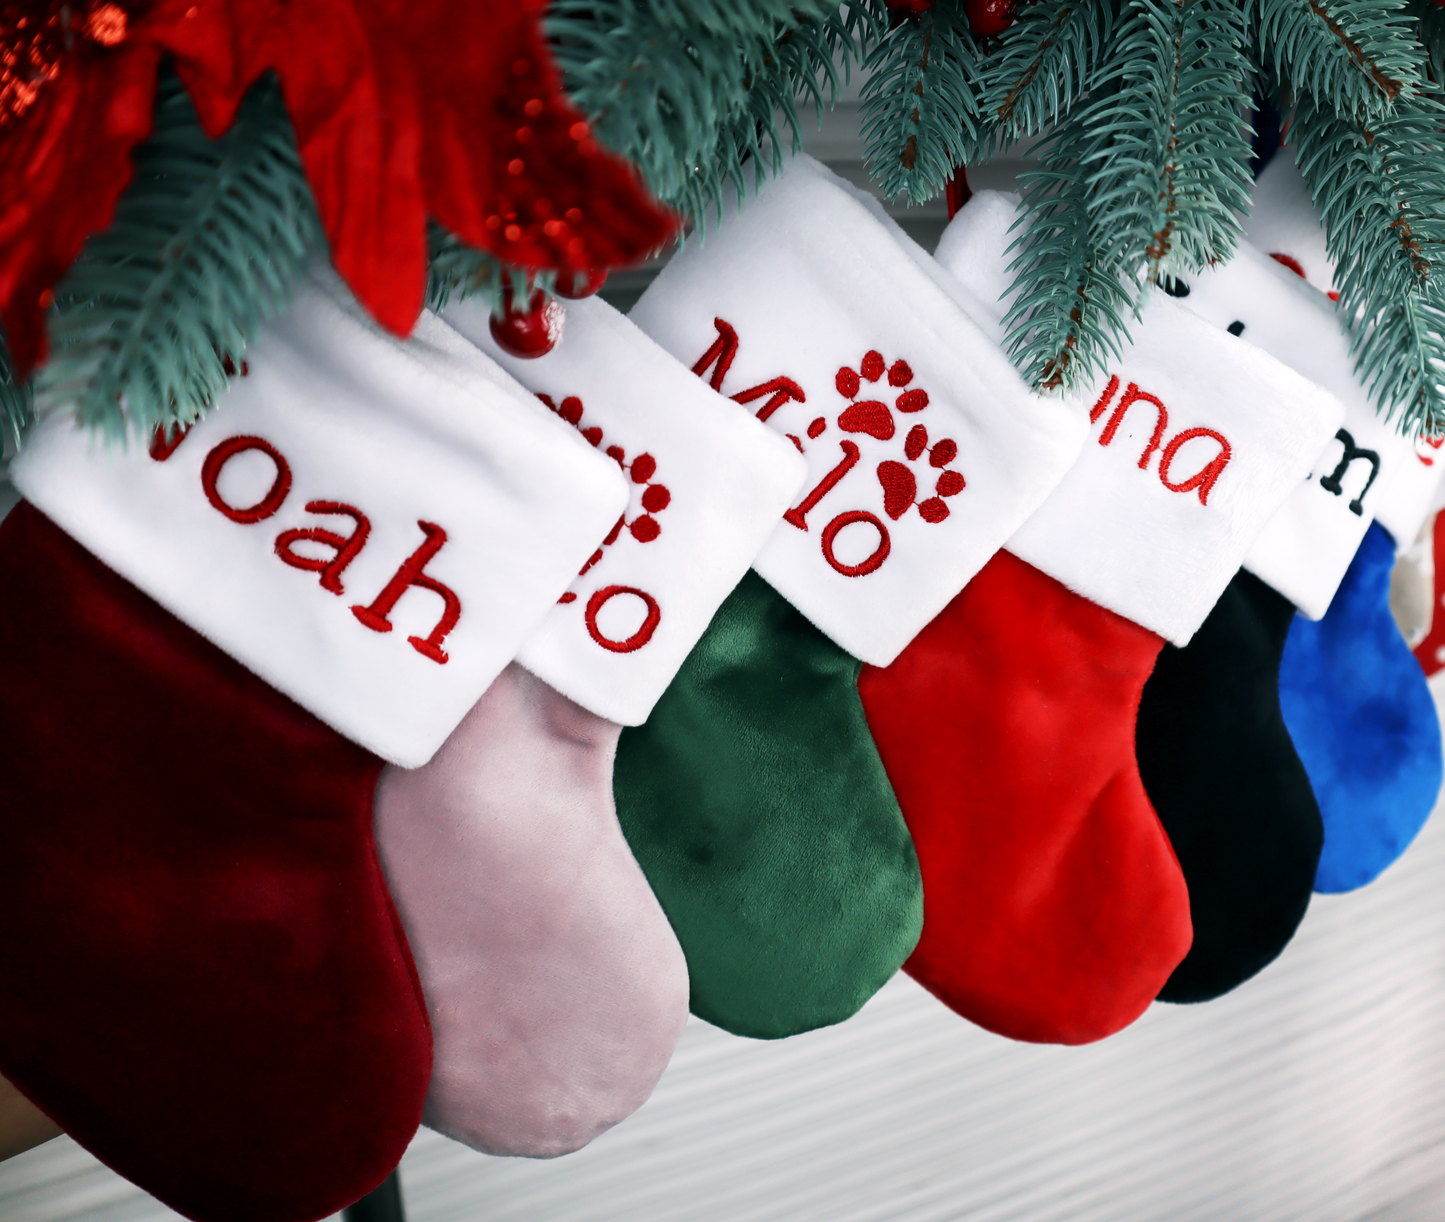 Dog Christmas stocking personalized embroidered for whole Family (royal blue)